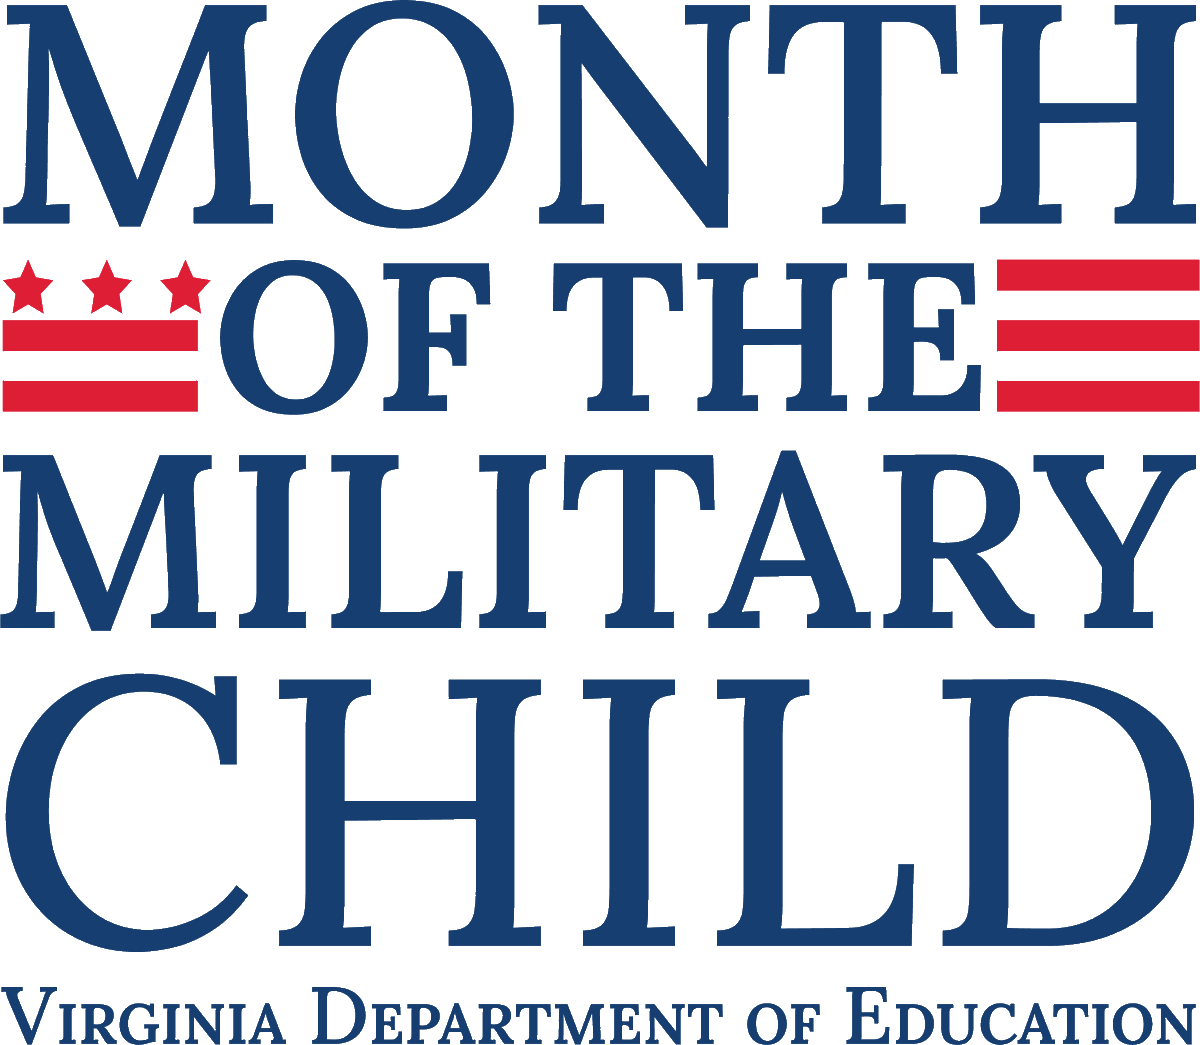 April is Month of the Military Child. Over 77,000 military-connected students are currently enrolled in Virginia’s public schools. Visit tinyurl.com/4fm8zvhp to find resources on recognizing & celebrating military students provided by the VDOE.  #FamilyEngagementFriday